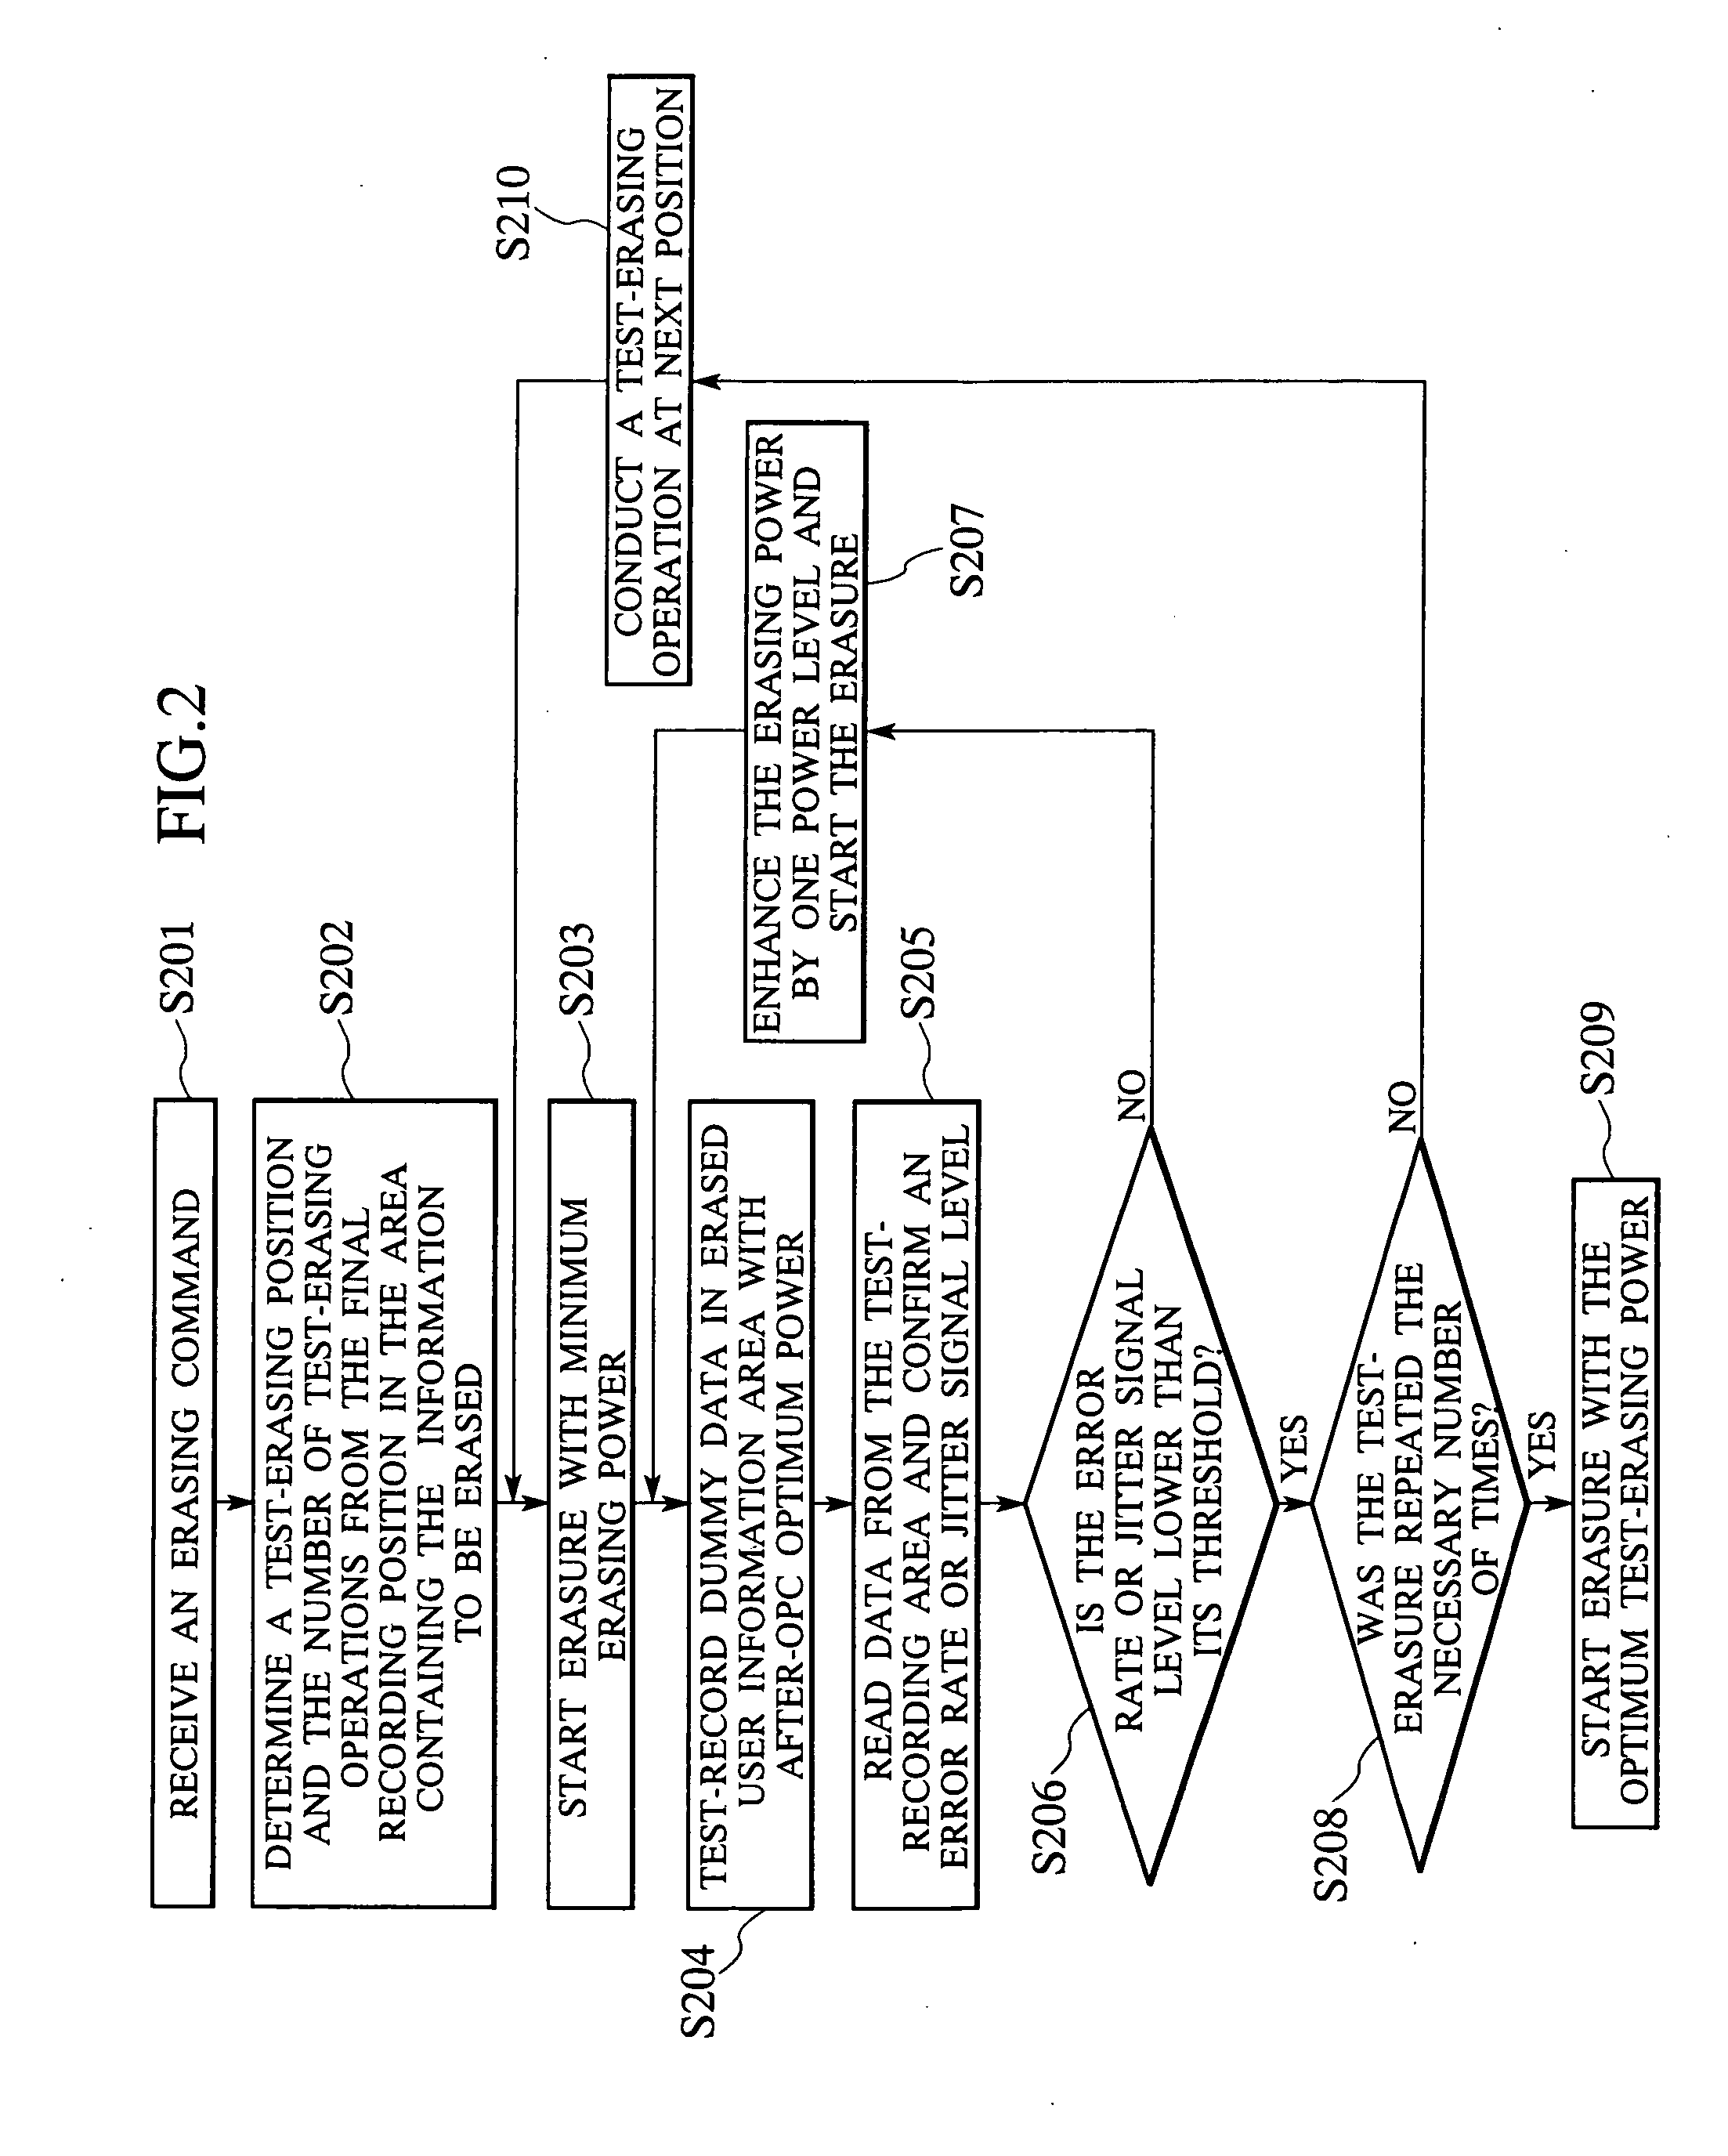 Optical disc apparatus and method of erasing information recorded thereon